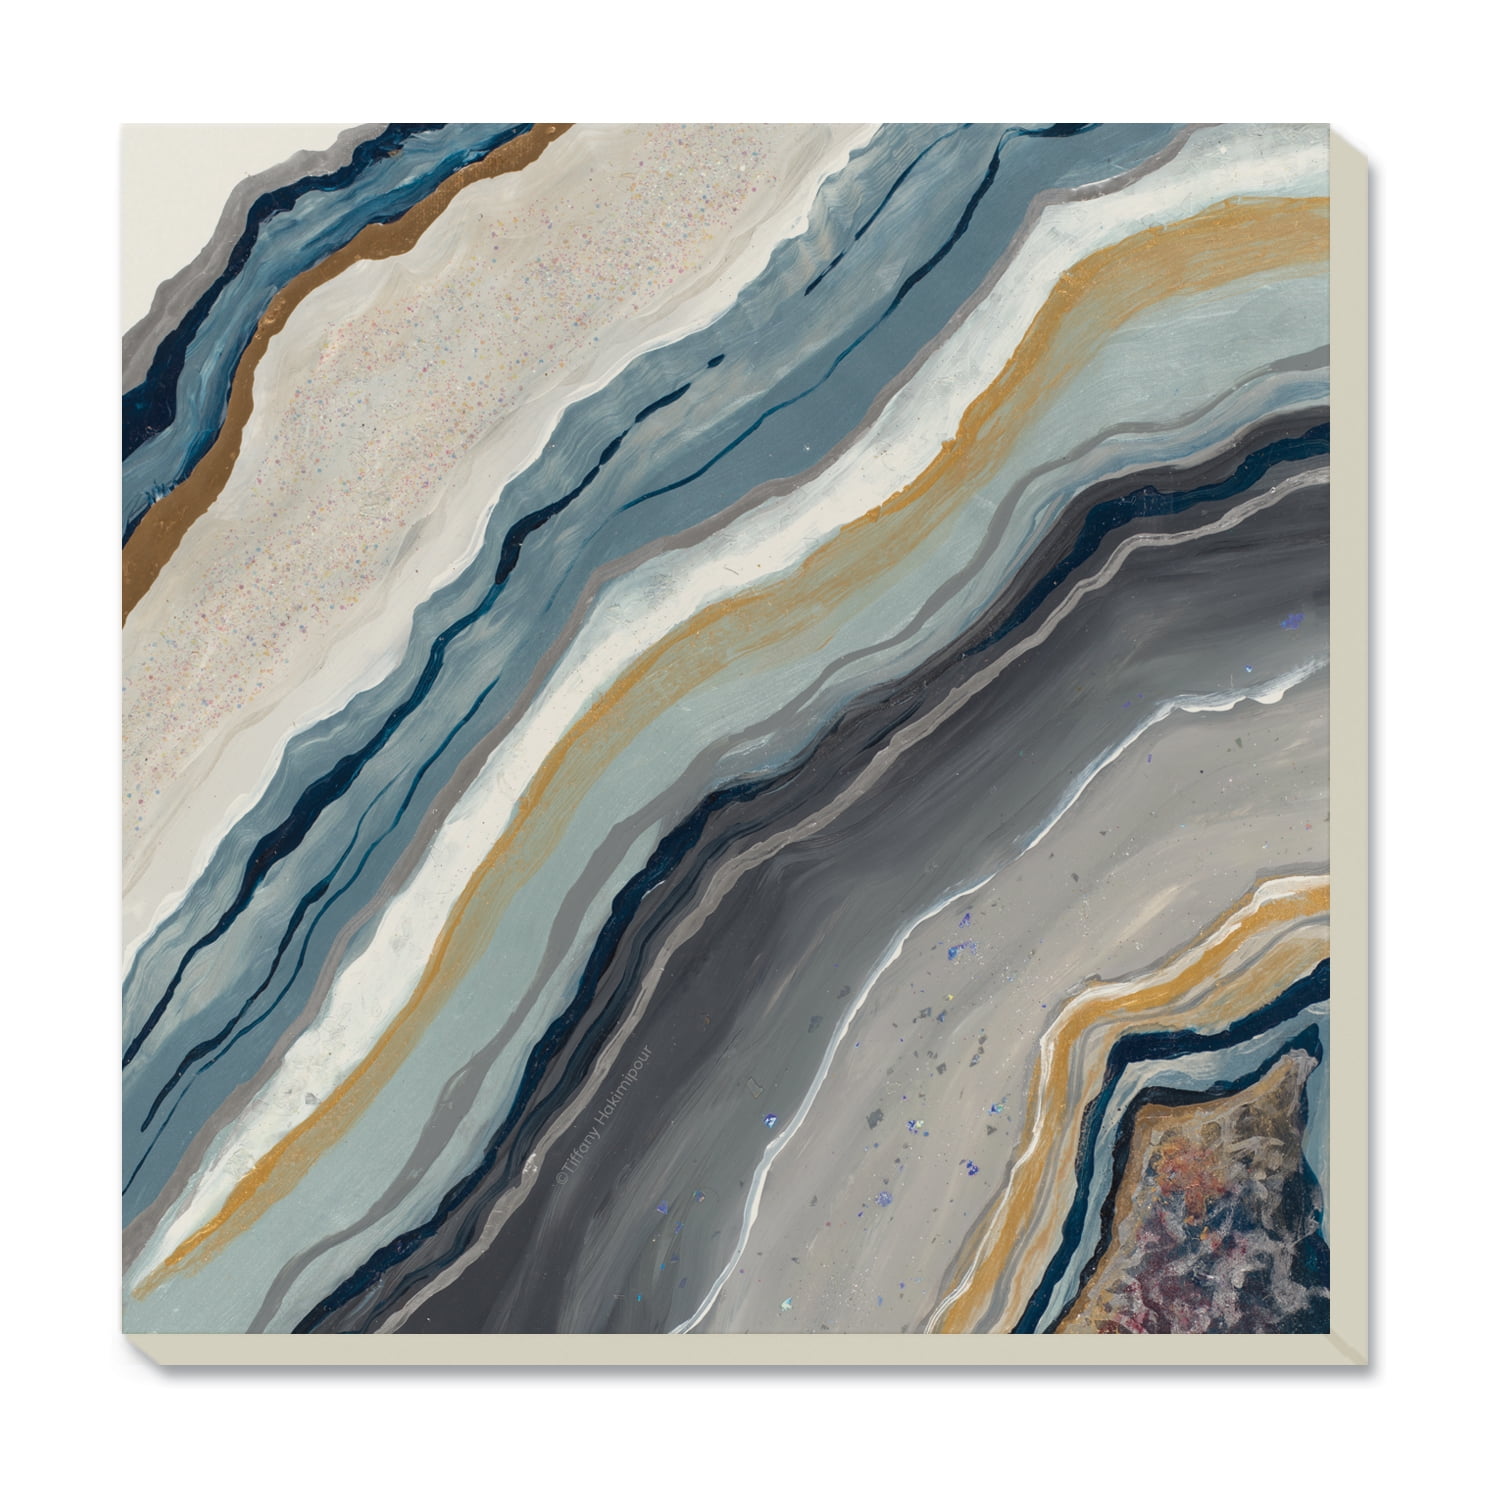 Conimar Agate Flow Stoneware with Cork Bottom Coasters, in Blues, Grey, White and Gold, 4PK